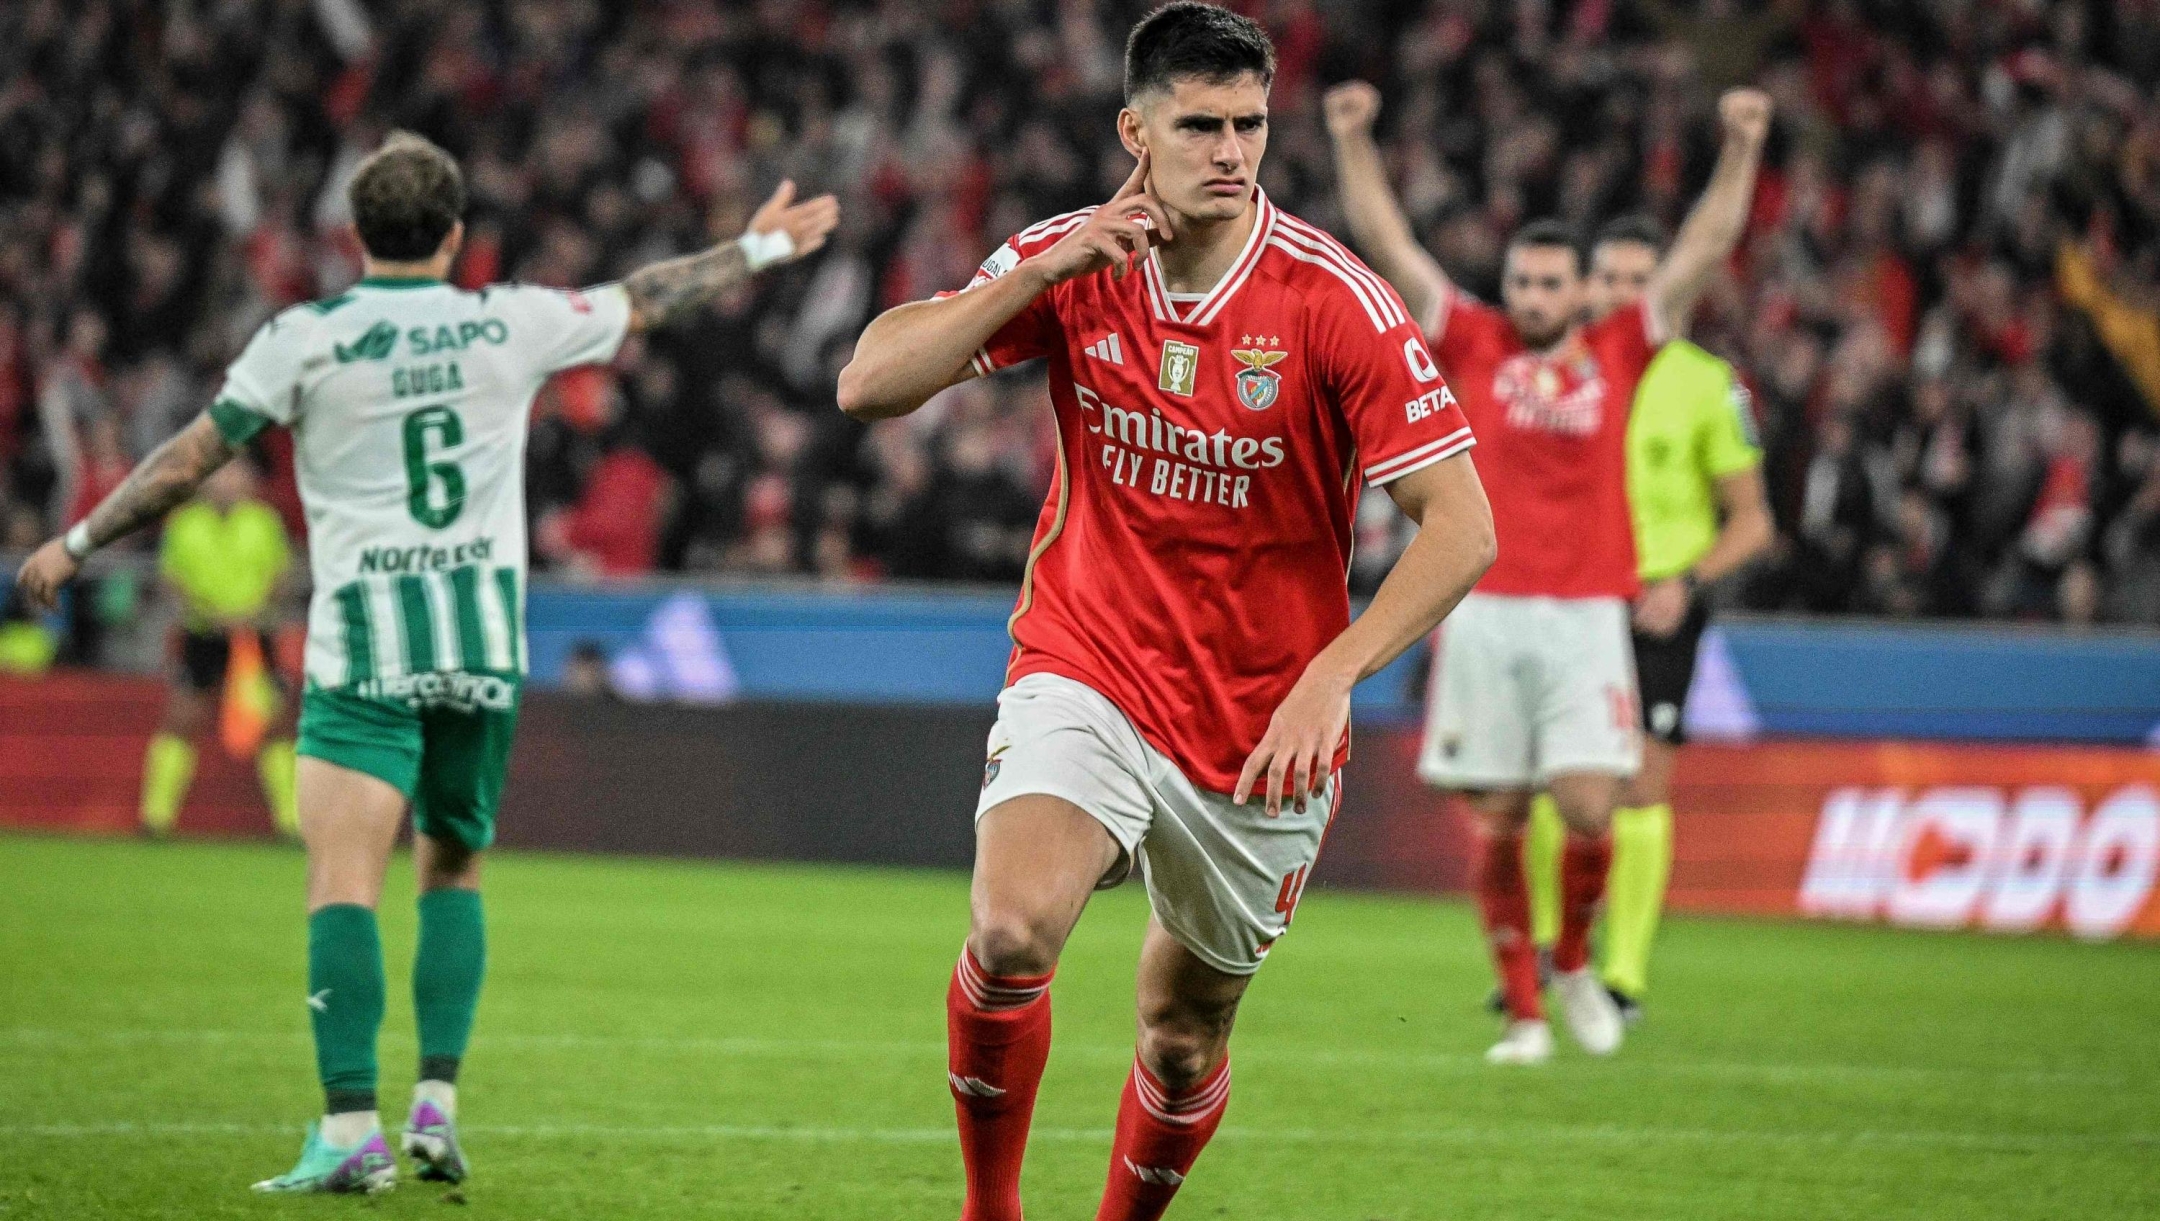 Benfica's Portuguese defender #04 Antonio Silva celebrates after scoring during the Portuguese League football match between SL Benfica and Rio Ave FC at the Luz stadium in Lisbon, on January 14, 2024. (Photo by PATRICIA DE MELO MOREIRA / AFP)